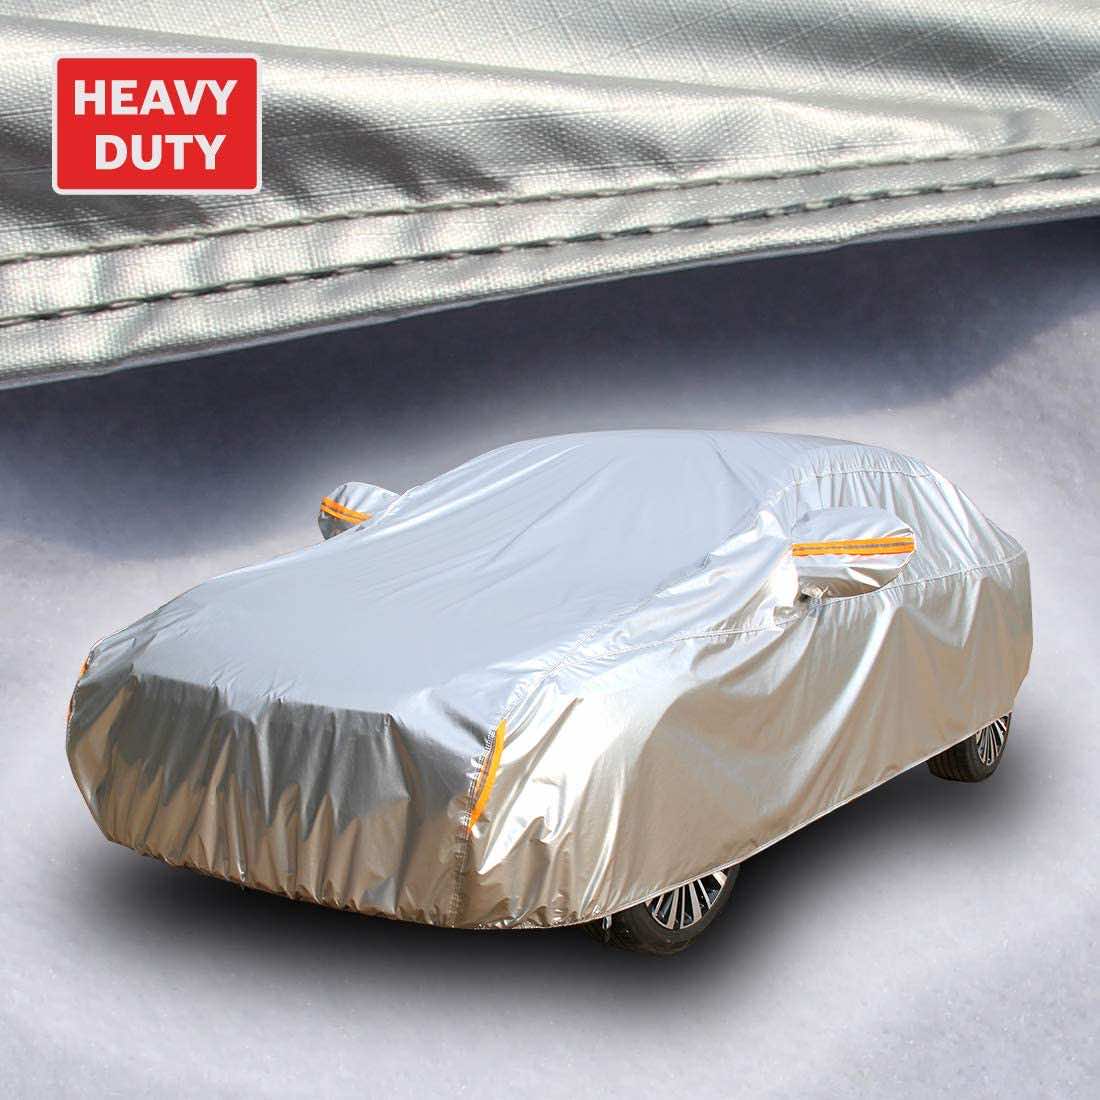 5 Layer 100% Waterproof CoverMaster Gold Shield Car Cover for Toyota Yaris Hatchback 